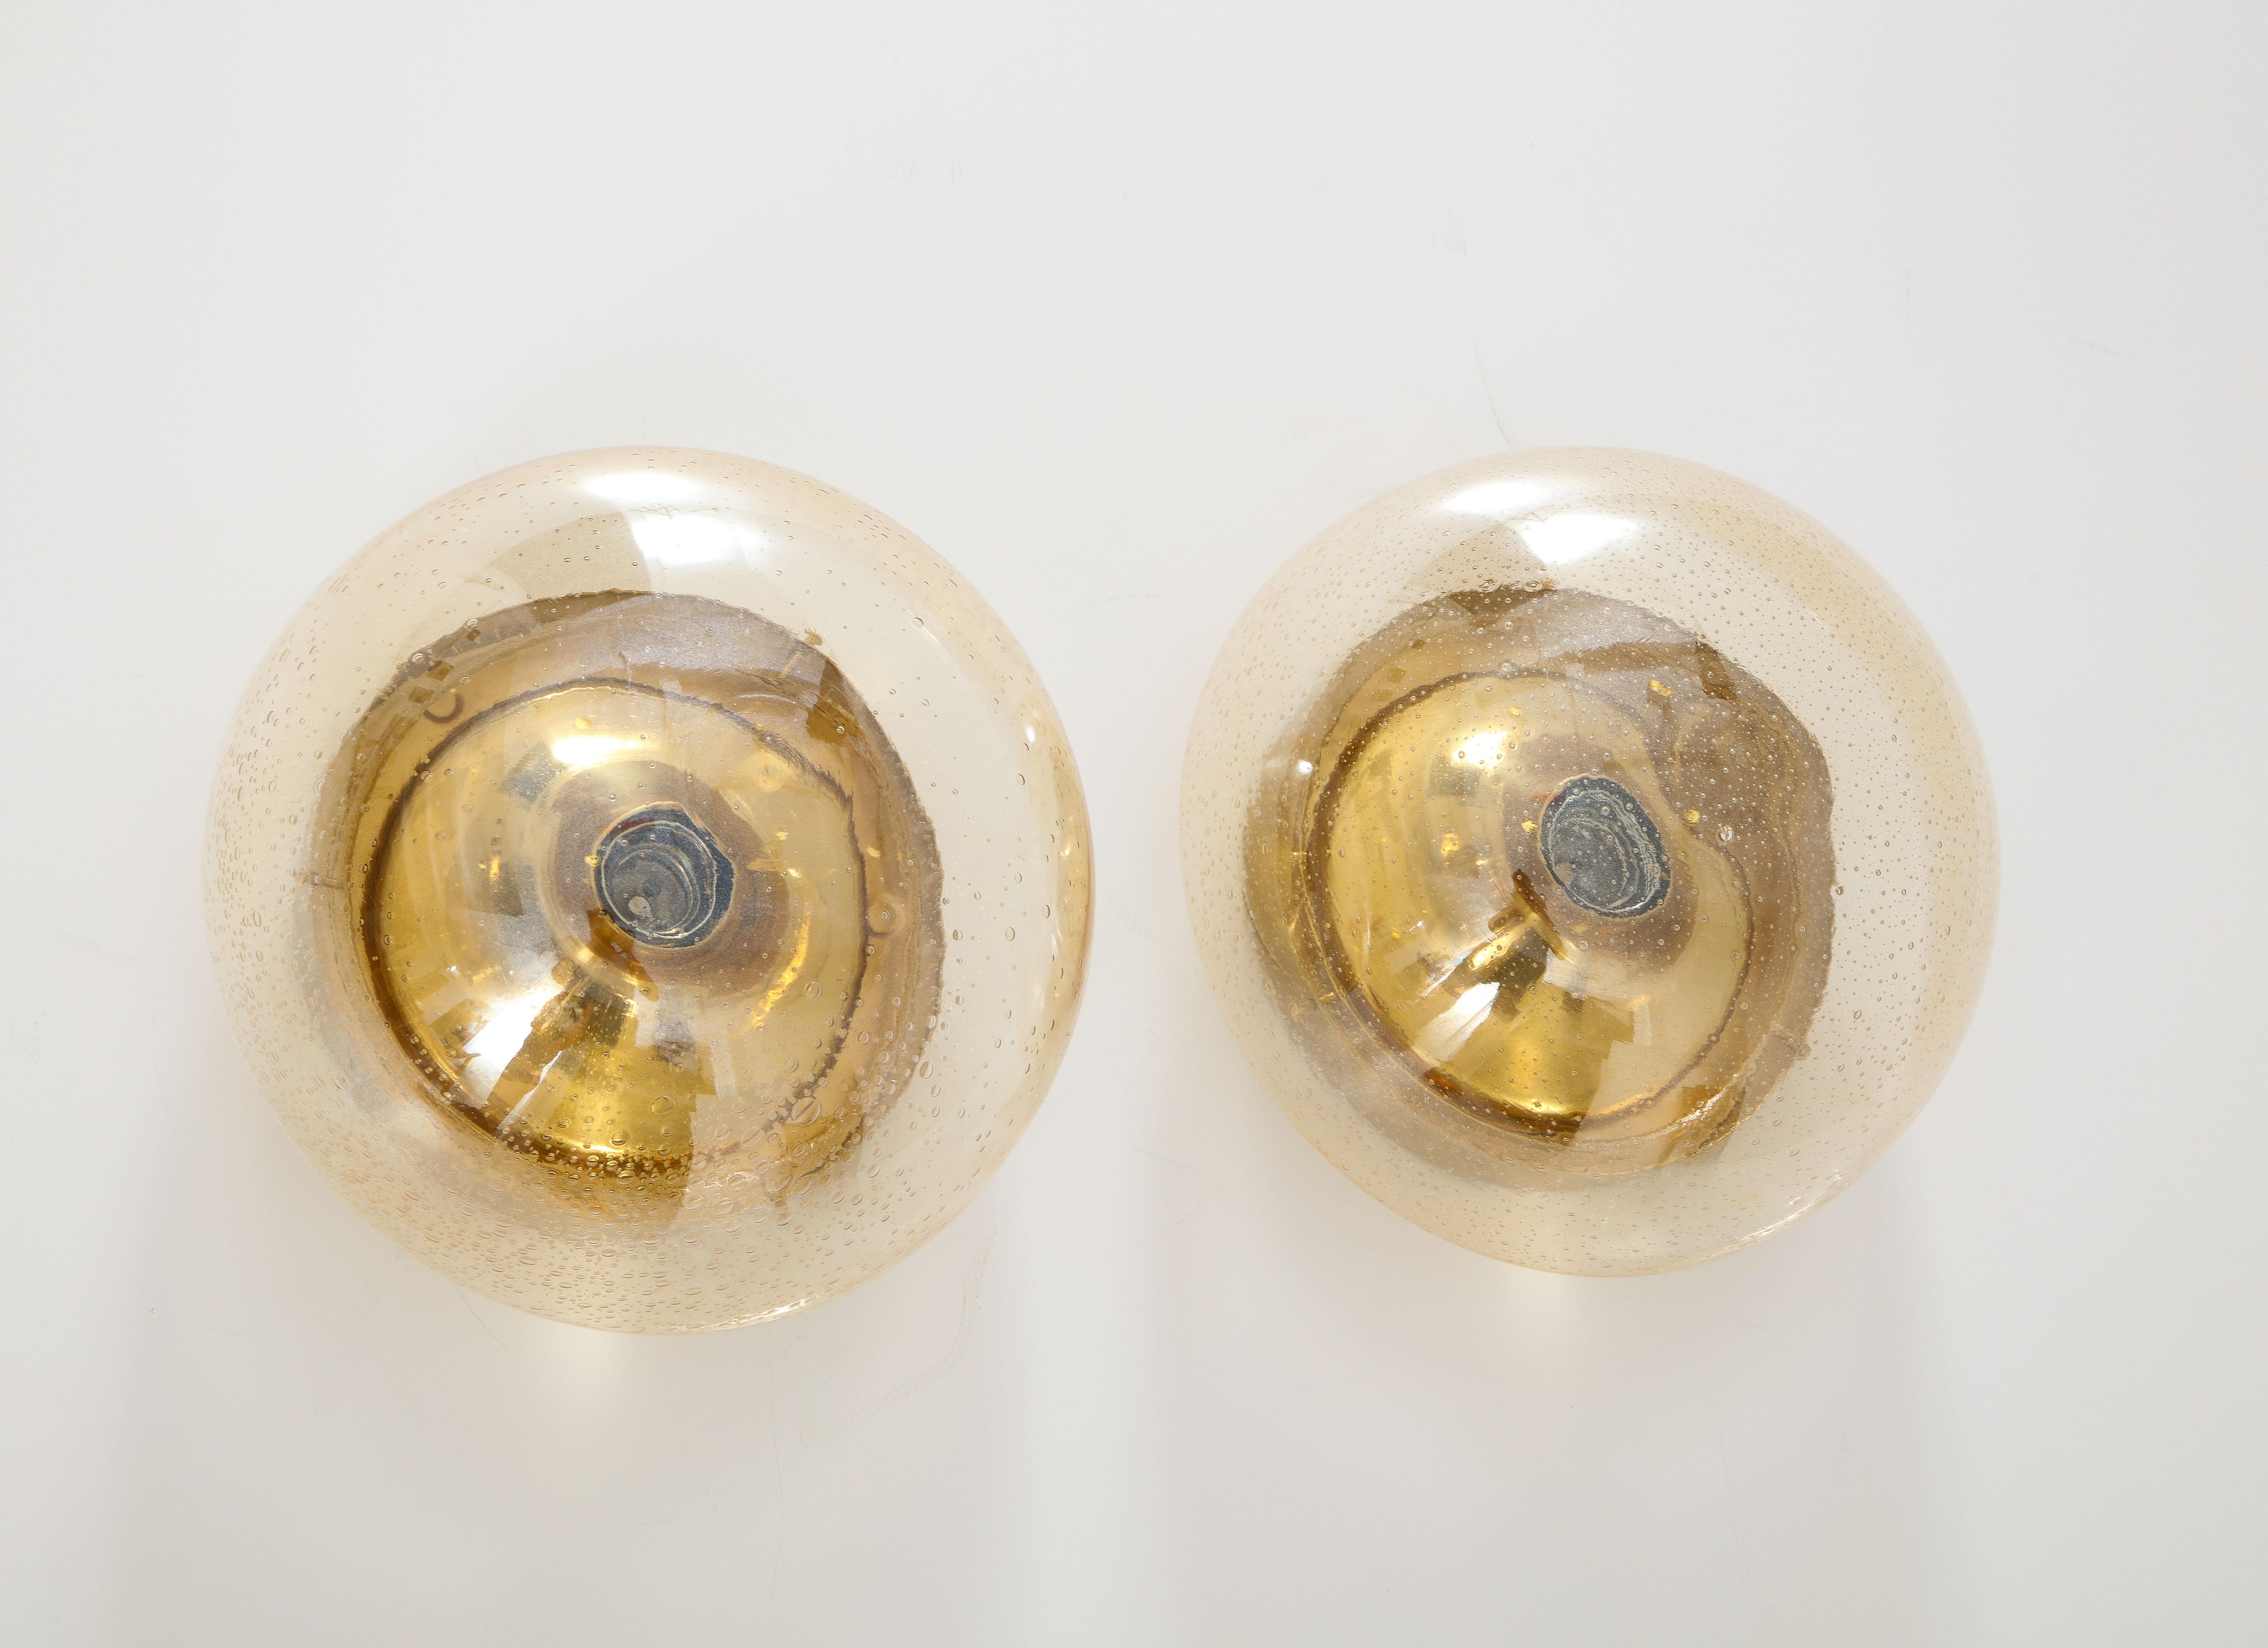 Pair of 1970's Murano glass dome sconces / flush mounts by Limburg.
The glass dome fits onto a brass back plate with a single light source
That has been Newly rewired for the US.